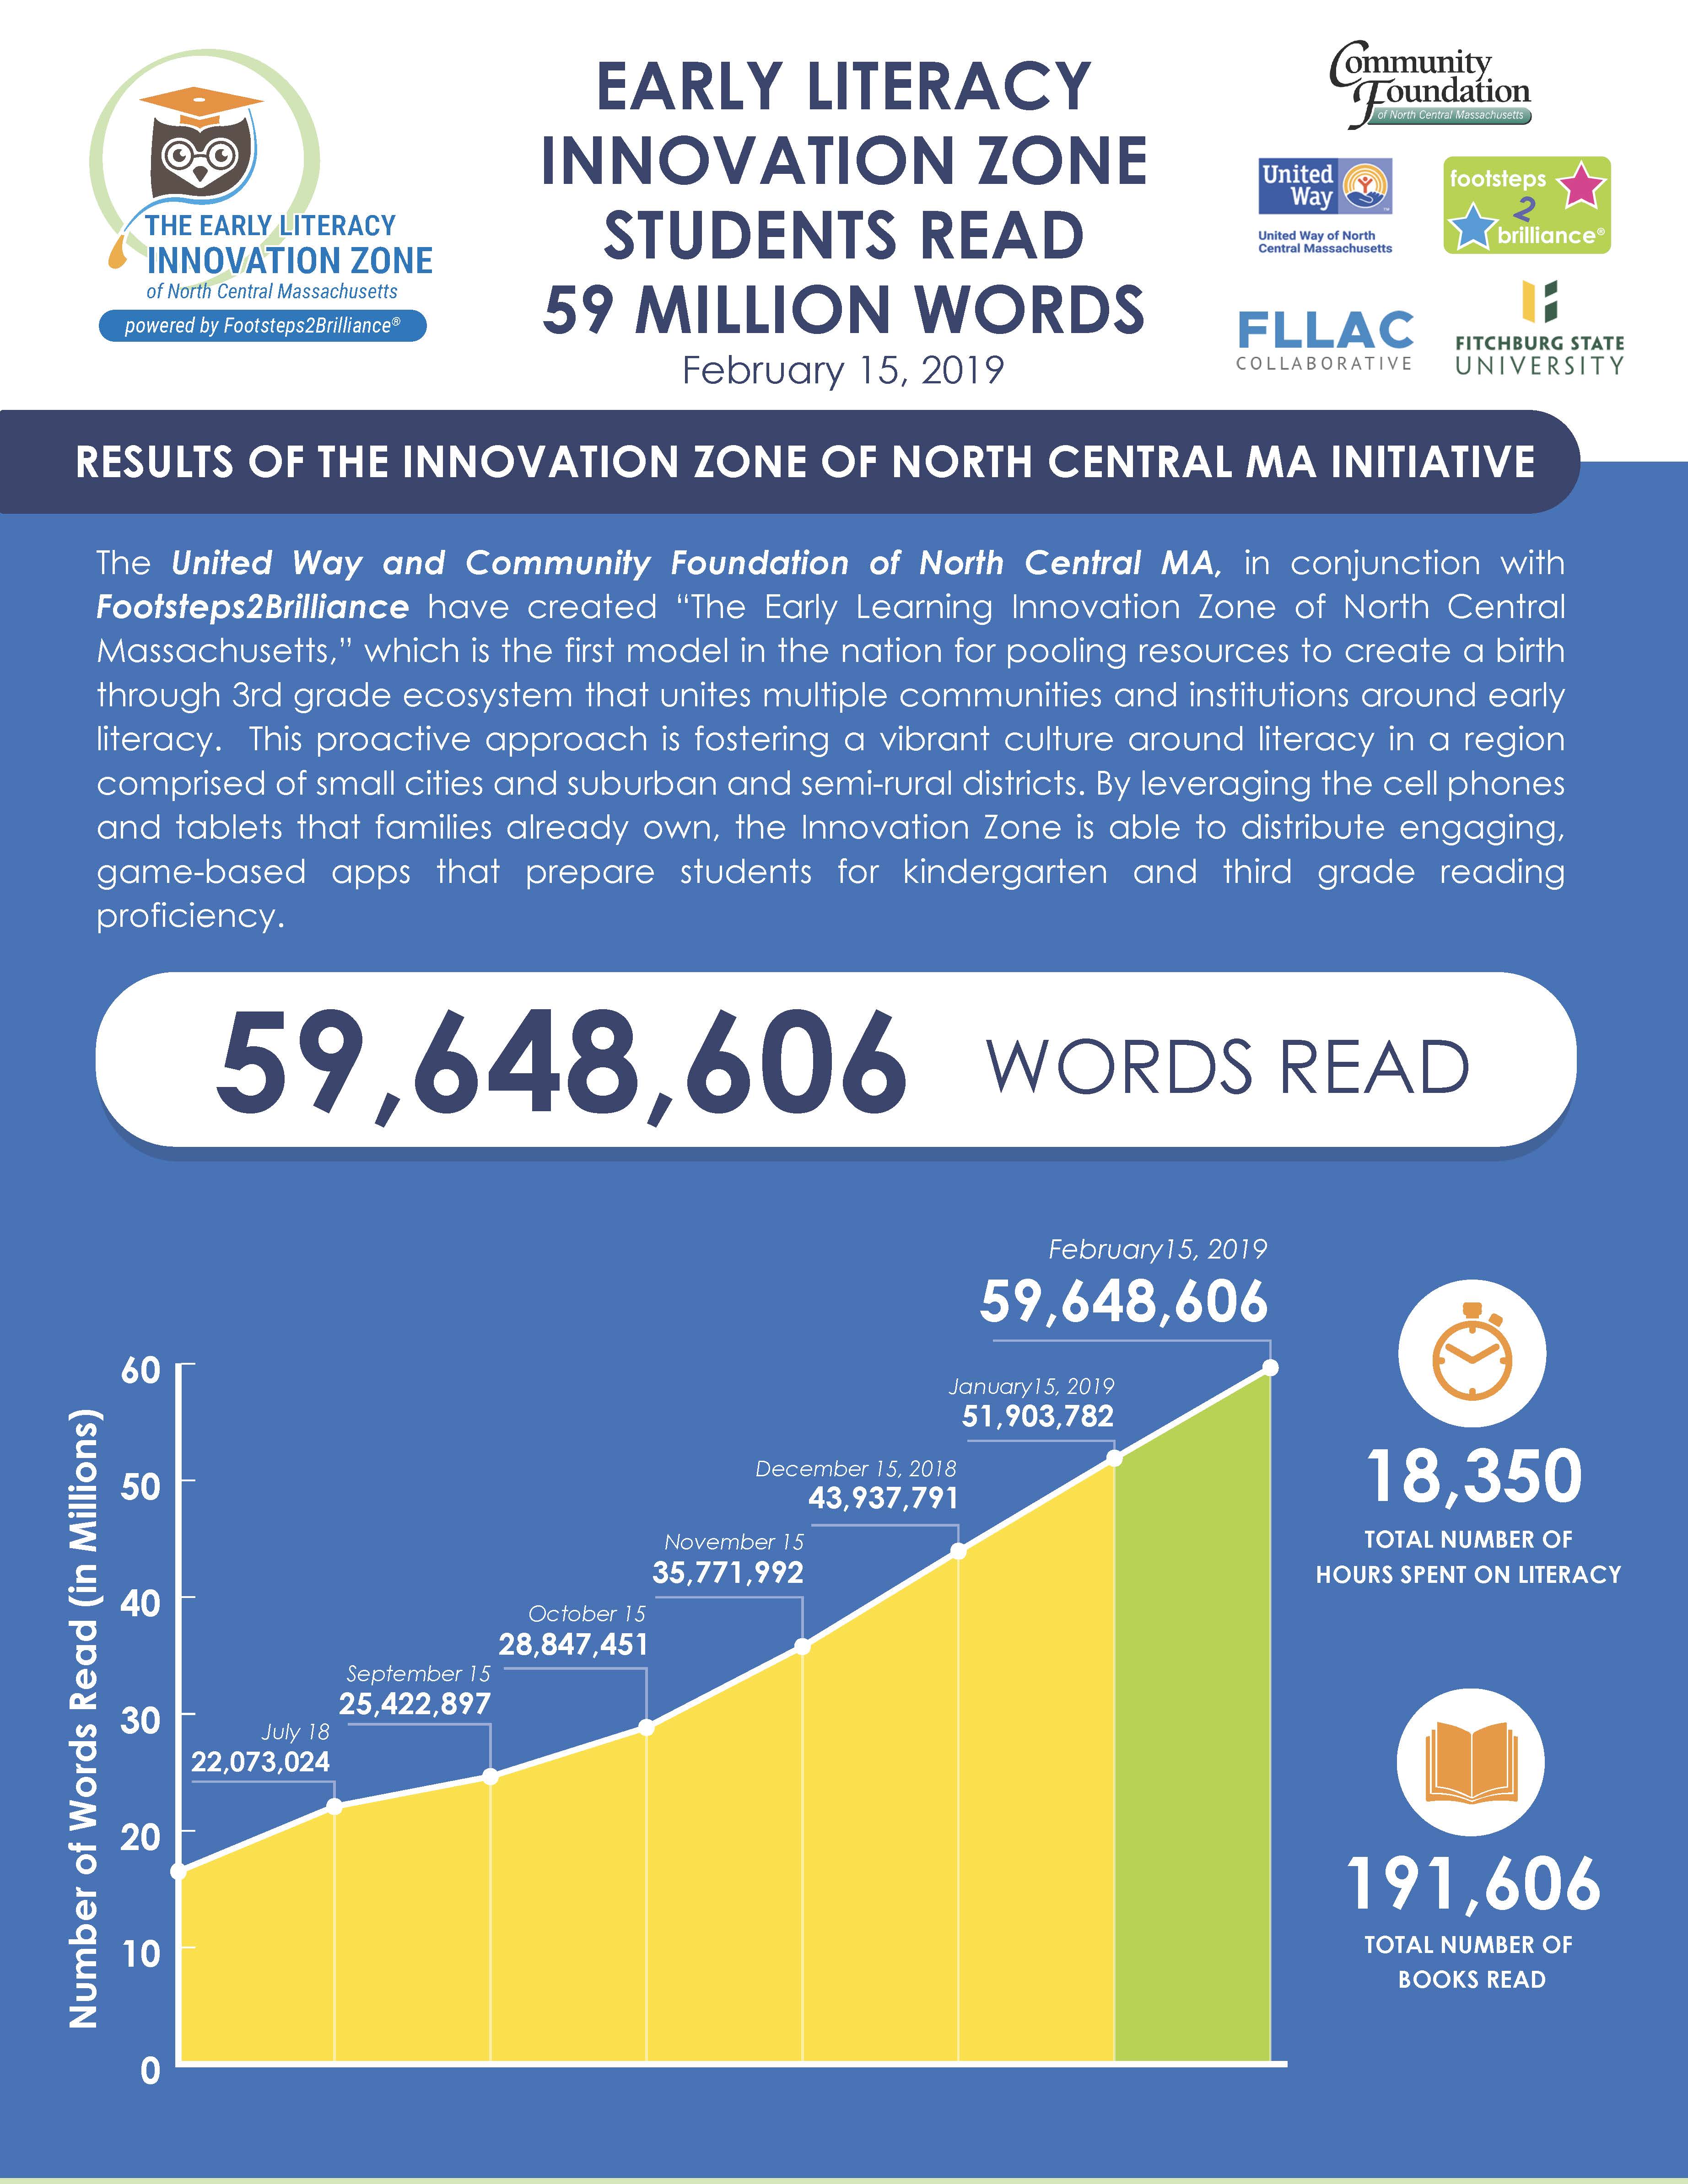 Number of words read